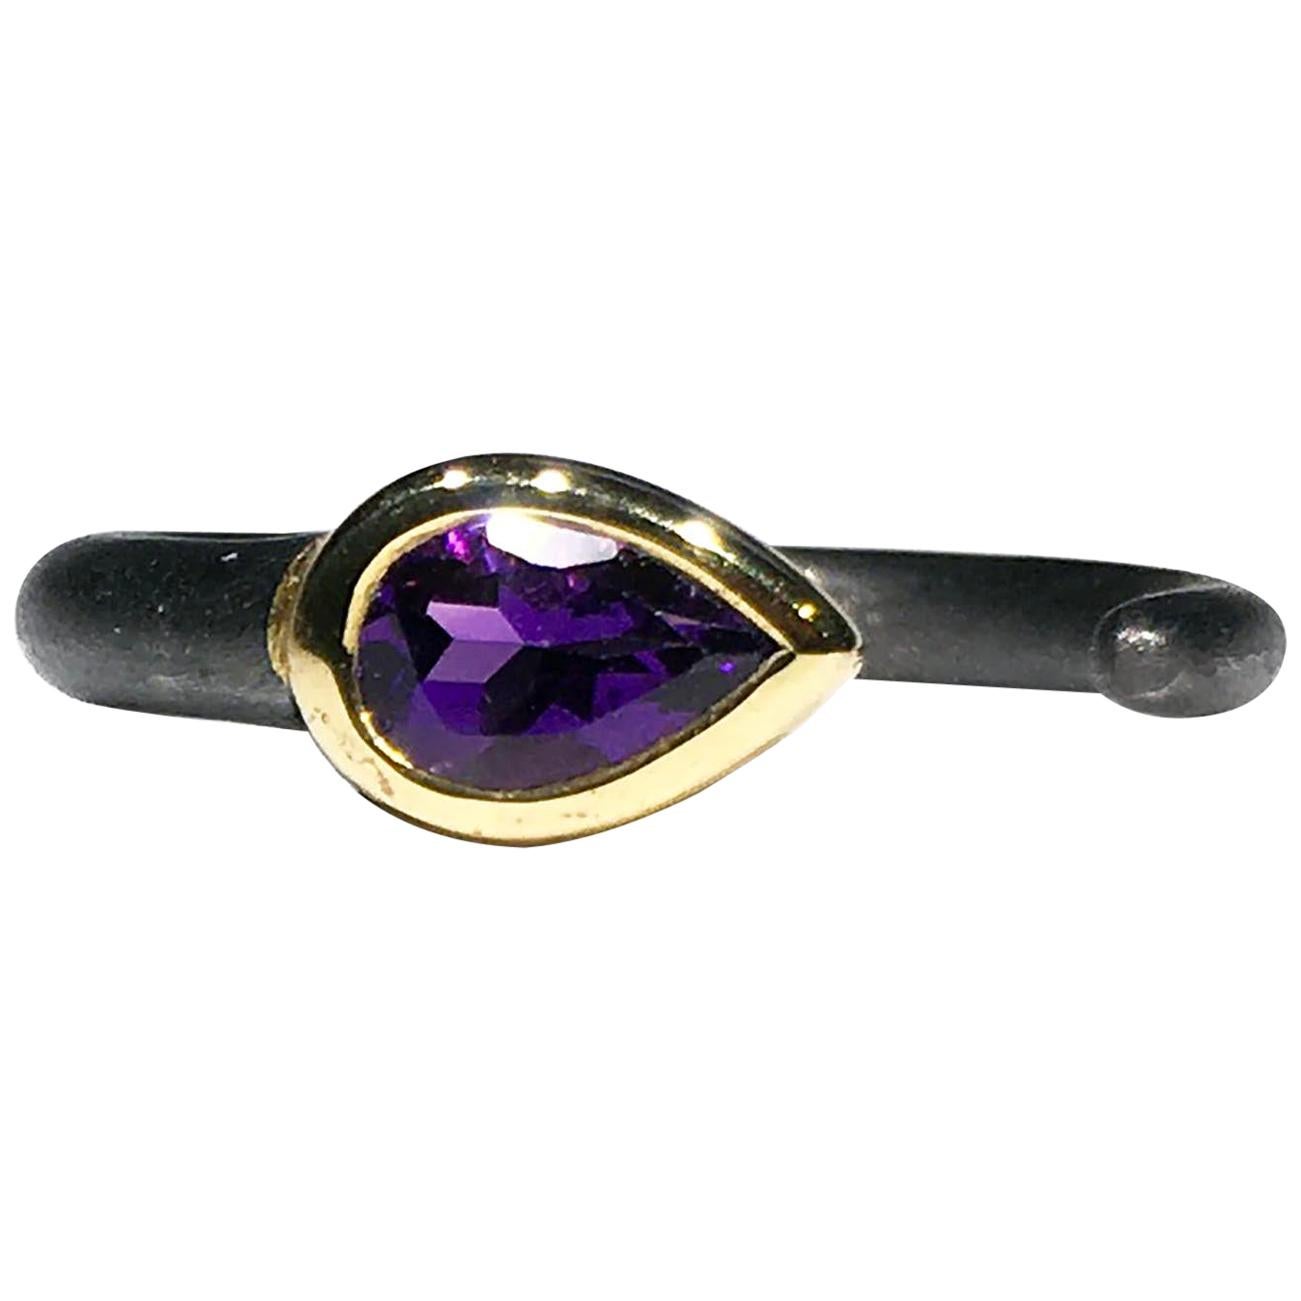 Blackened Silver Ring Set with Amethyst